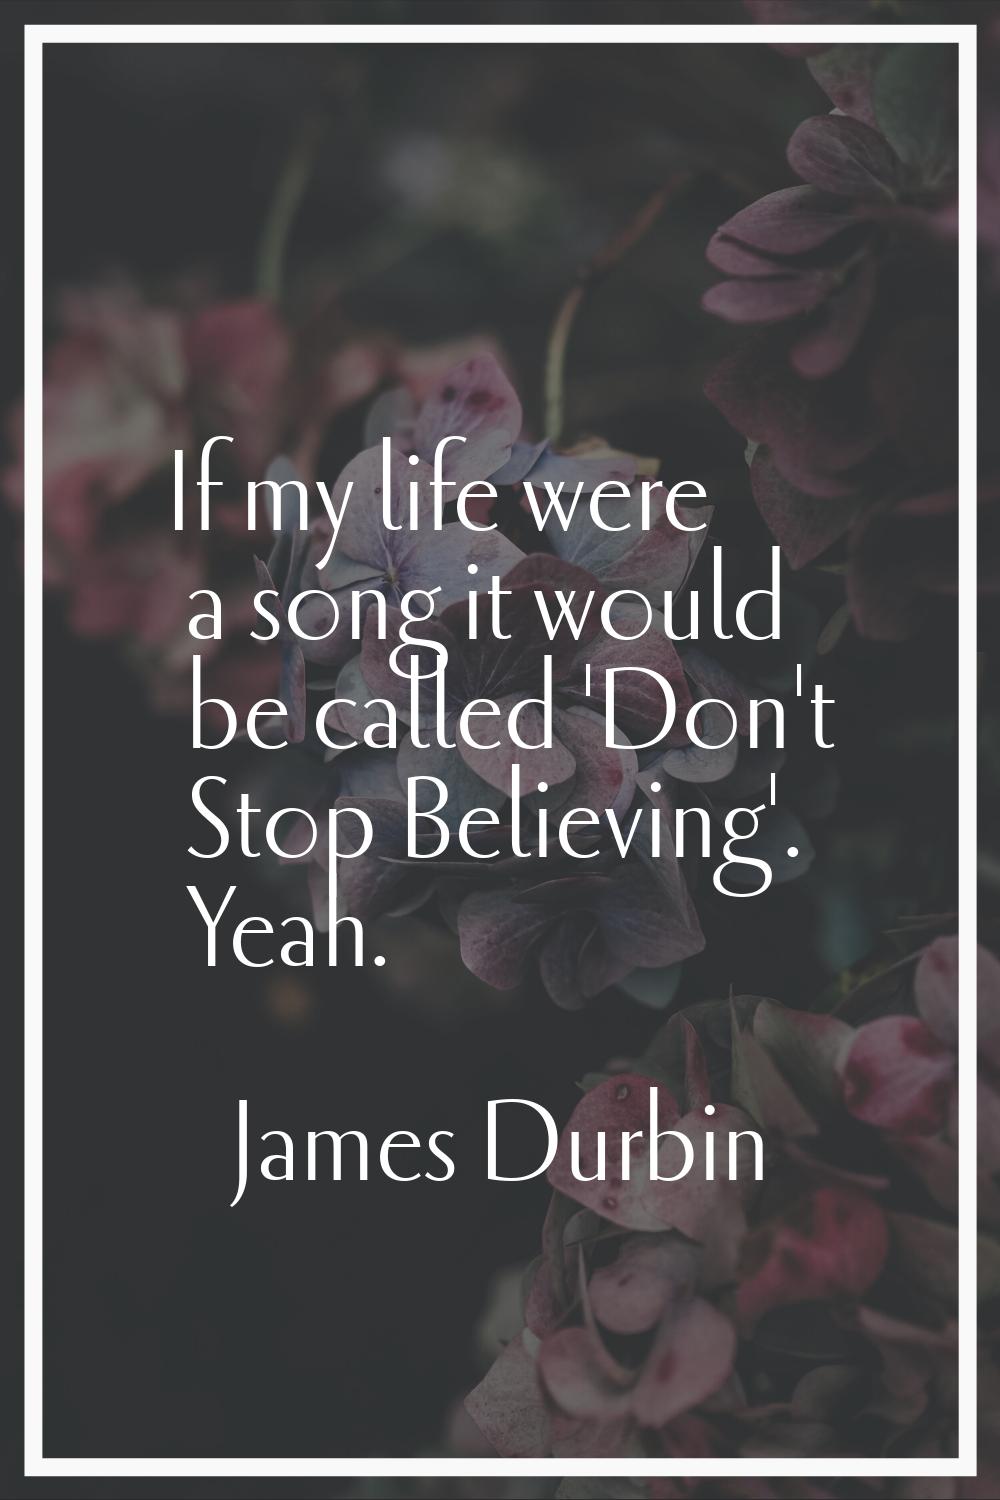 If my life were a song it would be called 'Don't Stop Believing'. Yeah.